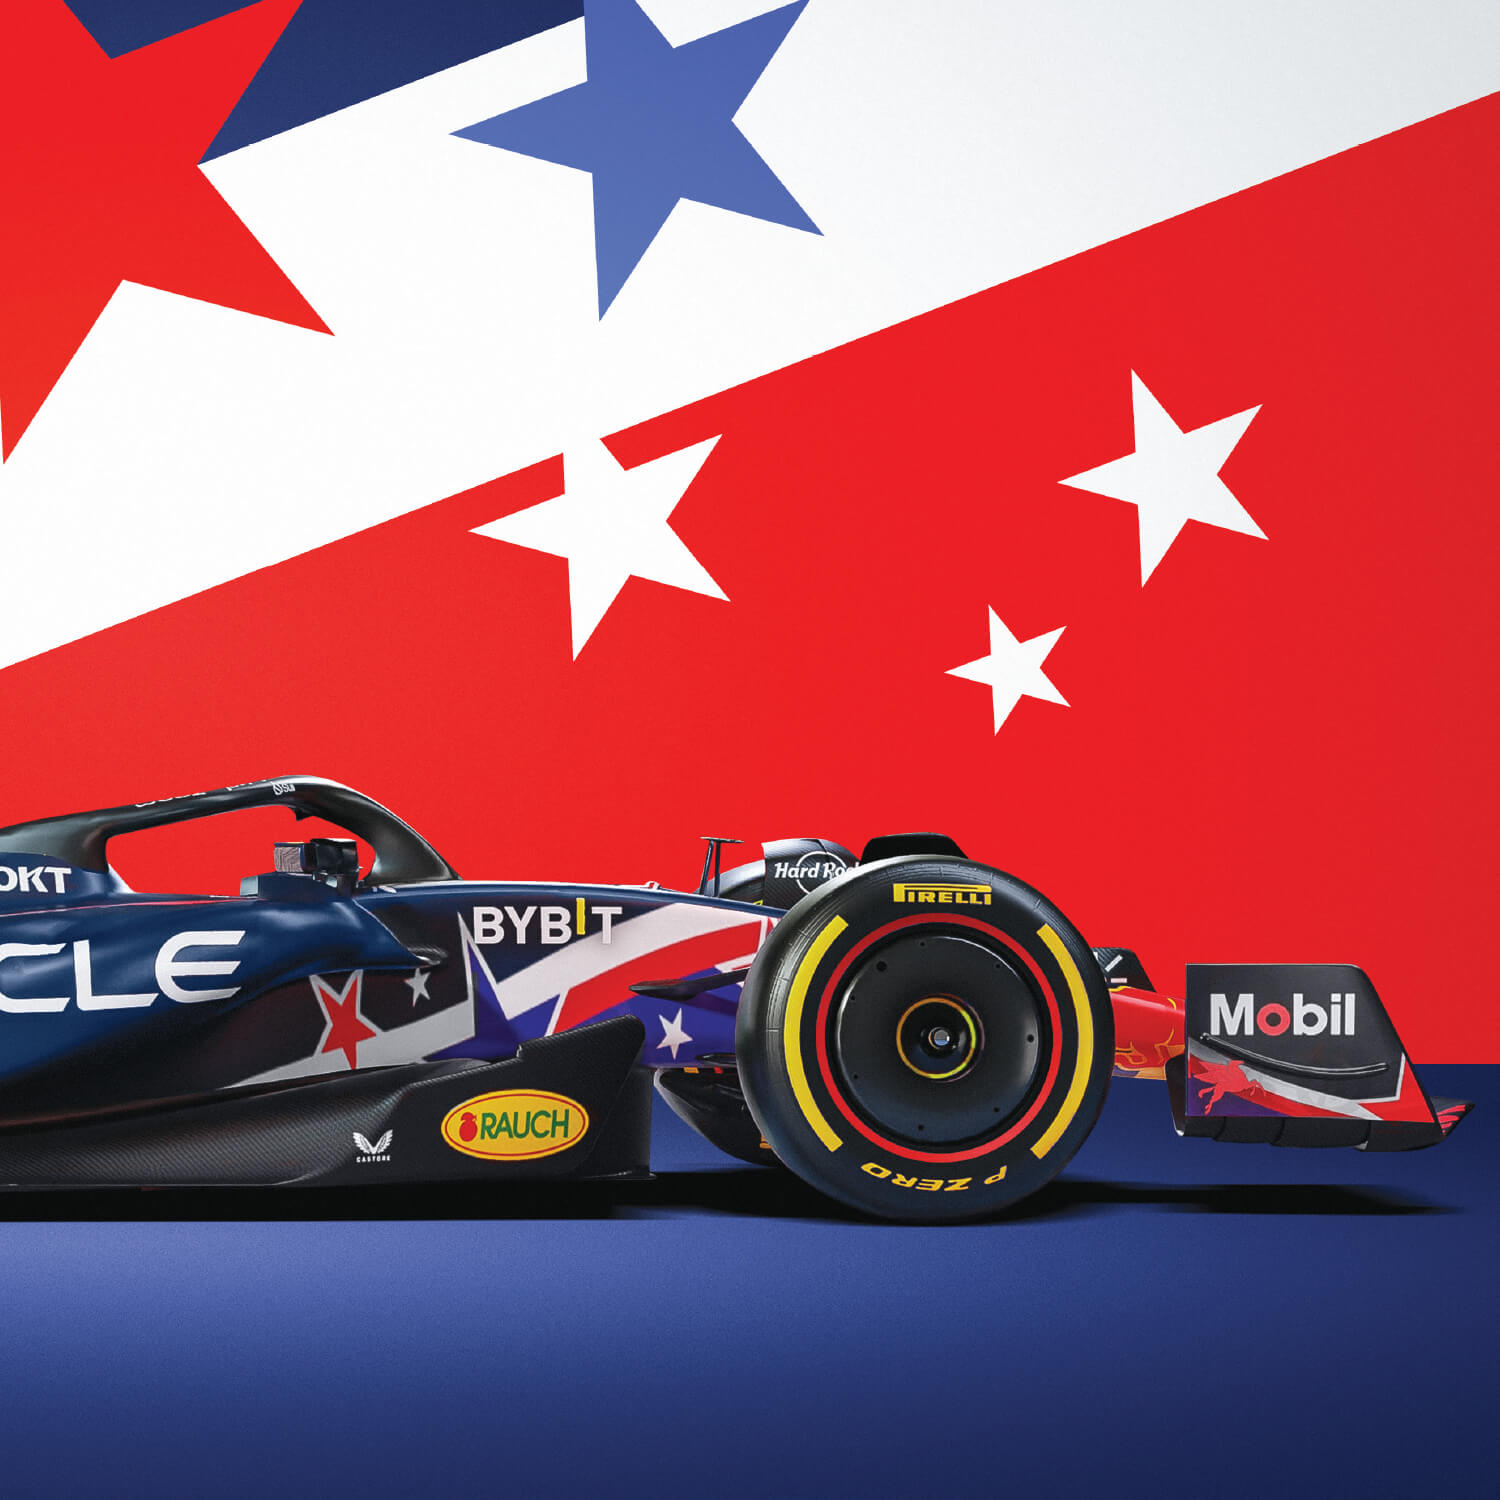 Oracle Red Bull Racing - United States Grand Prix - 2023